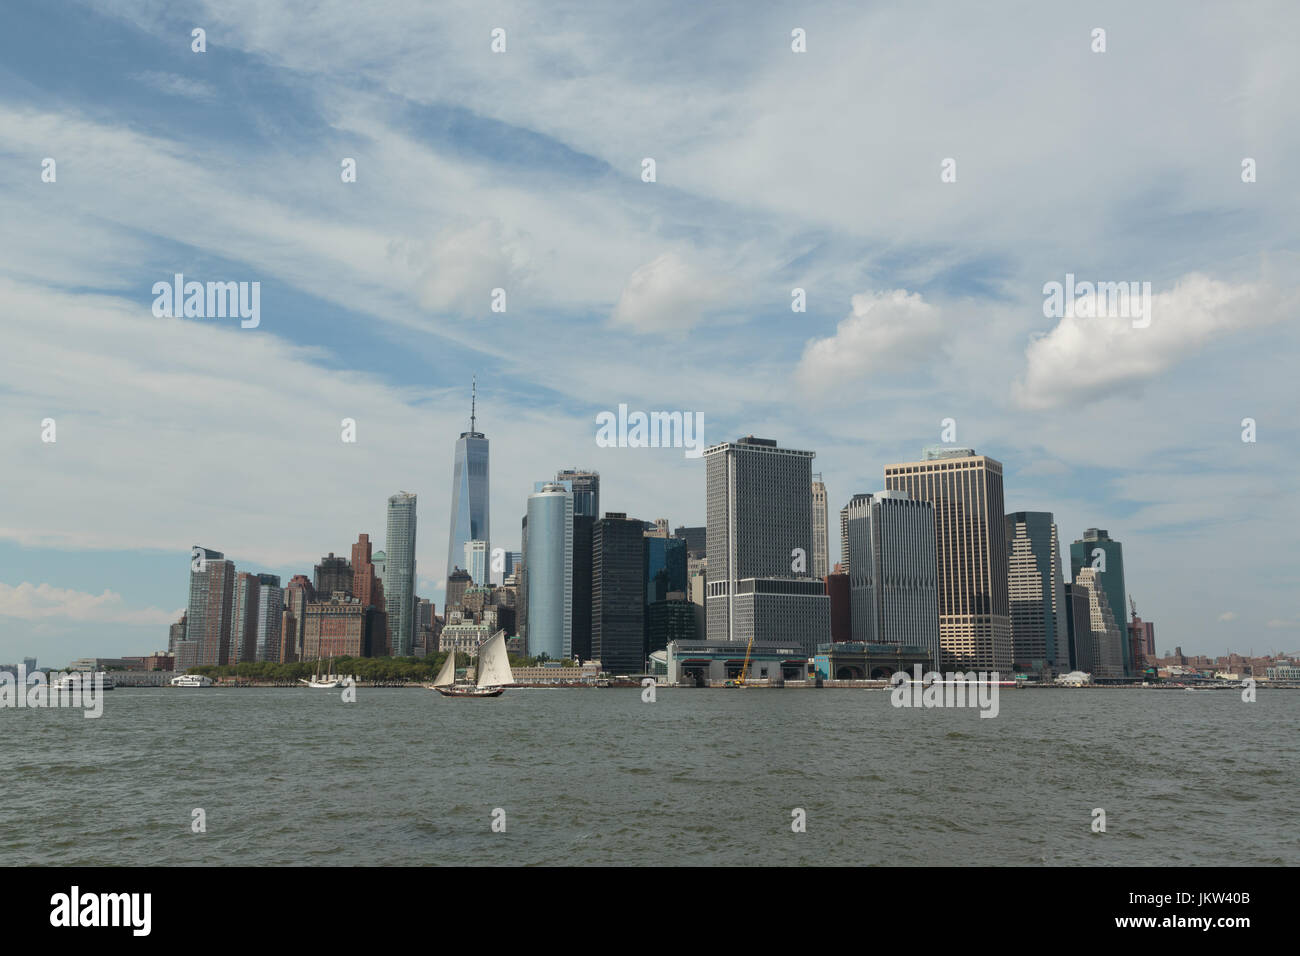 A photograph of Manhattan skyline, as seen from Governor's Island, New York City. An old sailing ship can be seen in the foreground. Stock Photo